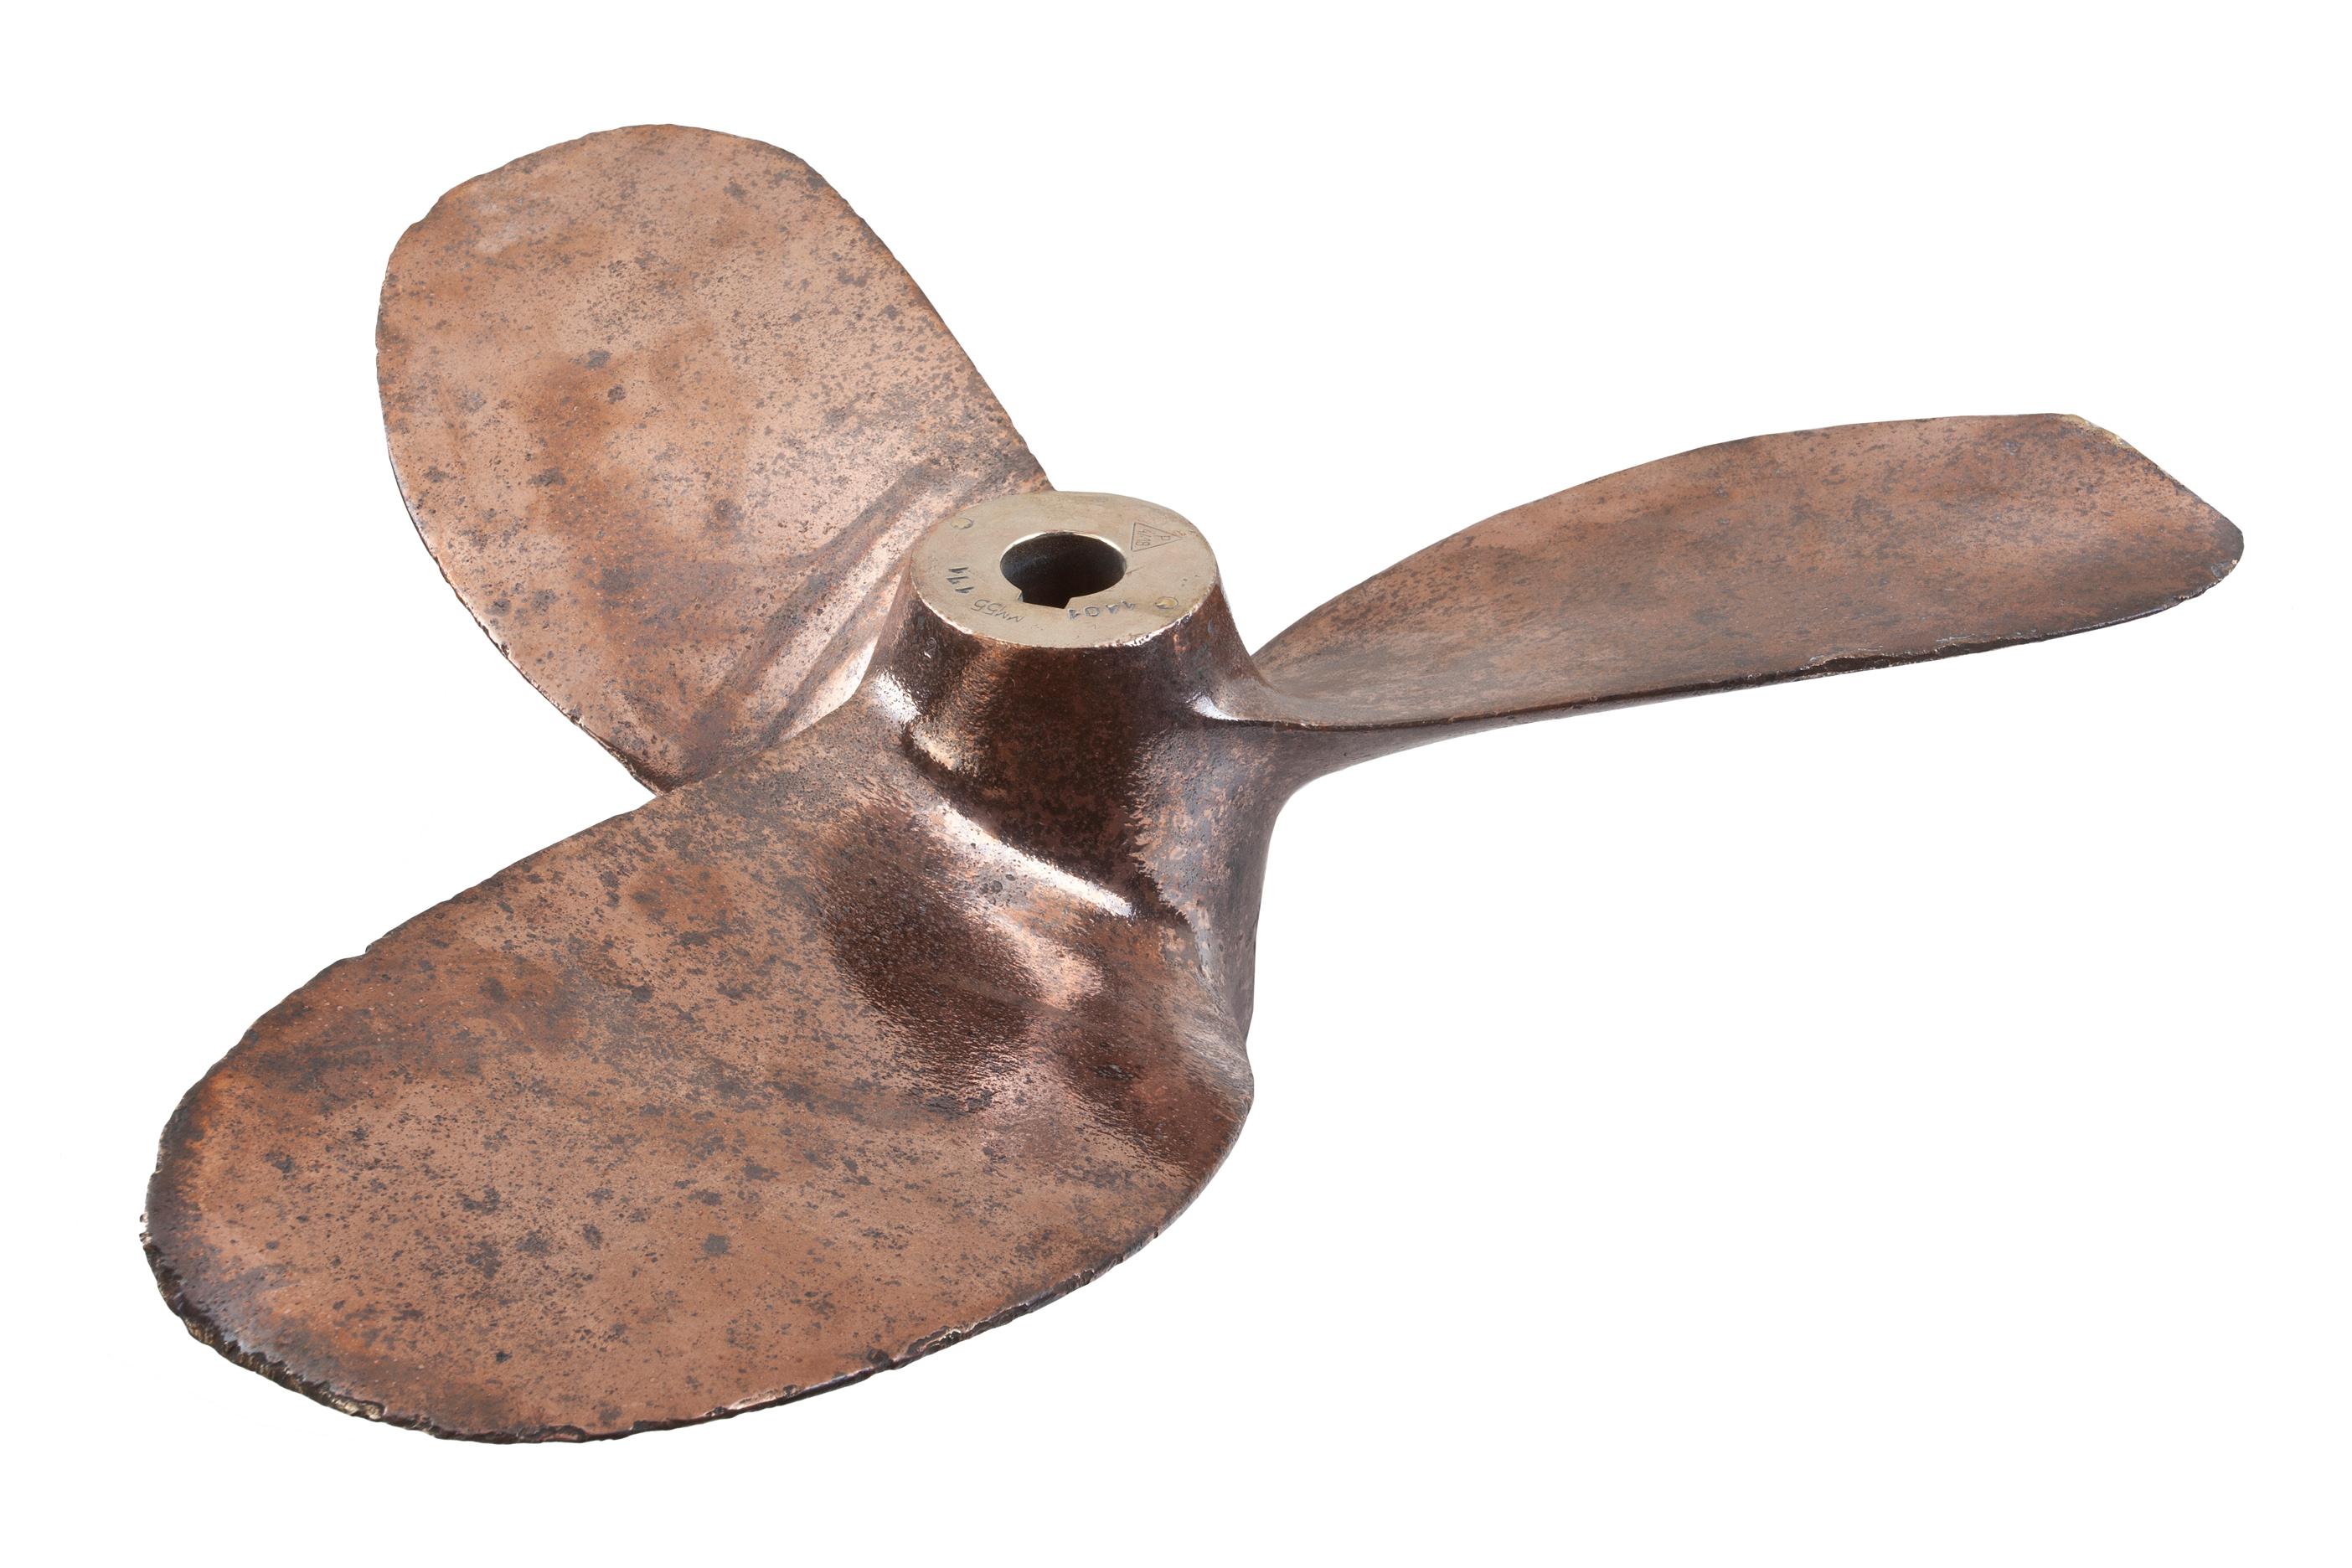 why are propellers made of bronze